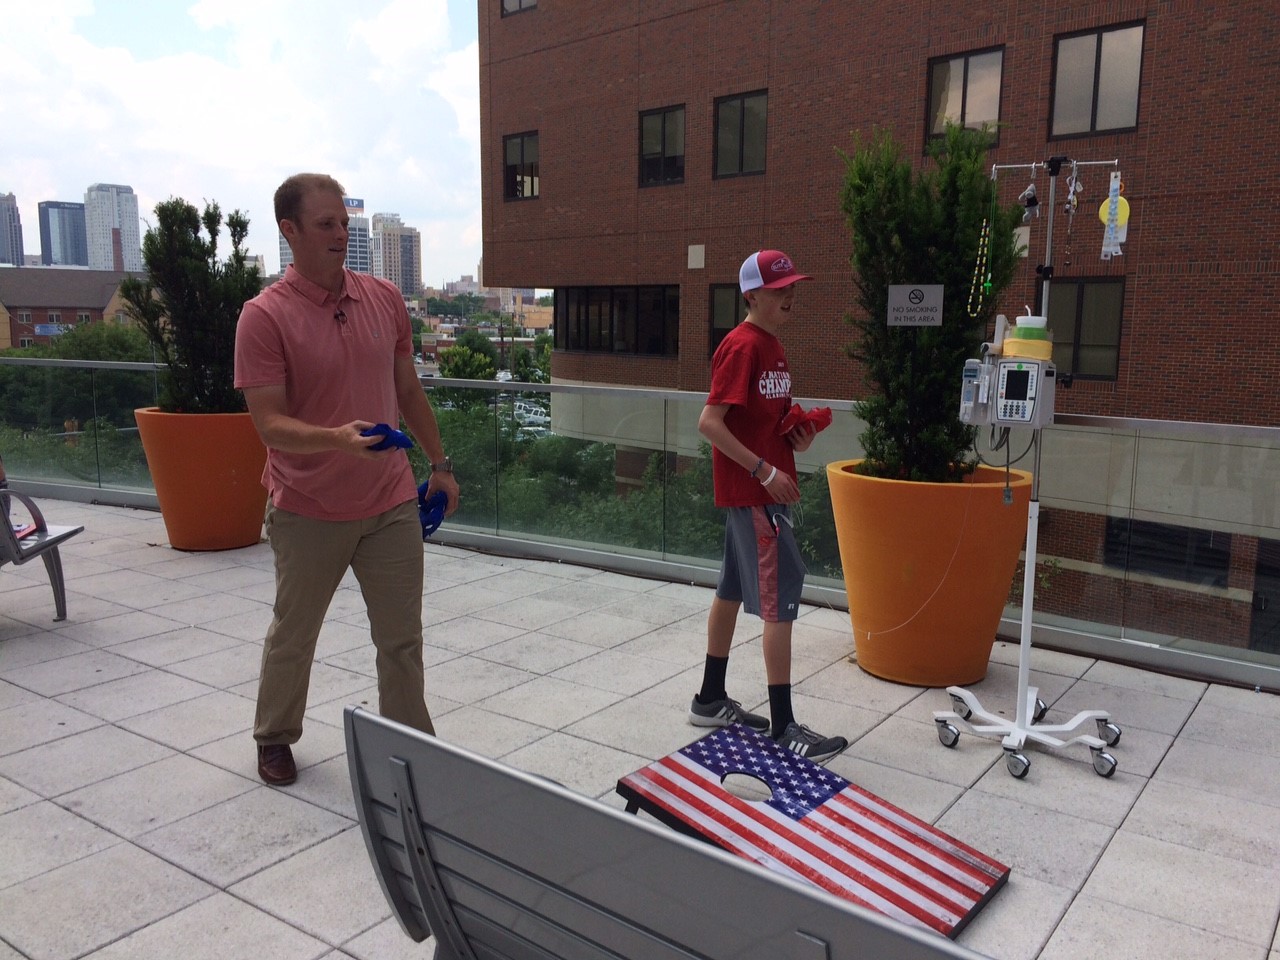 On the patio of Children's of Alabama, Greg McElroy and Kolbe play for the title in a game of cornhole.